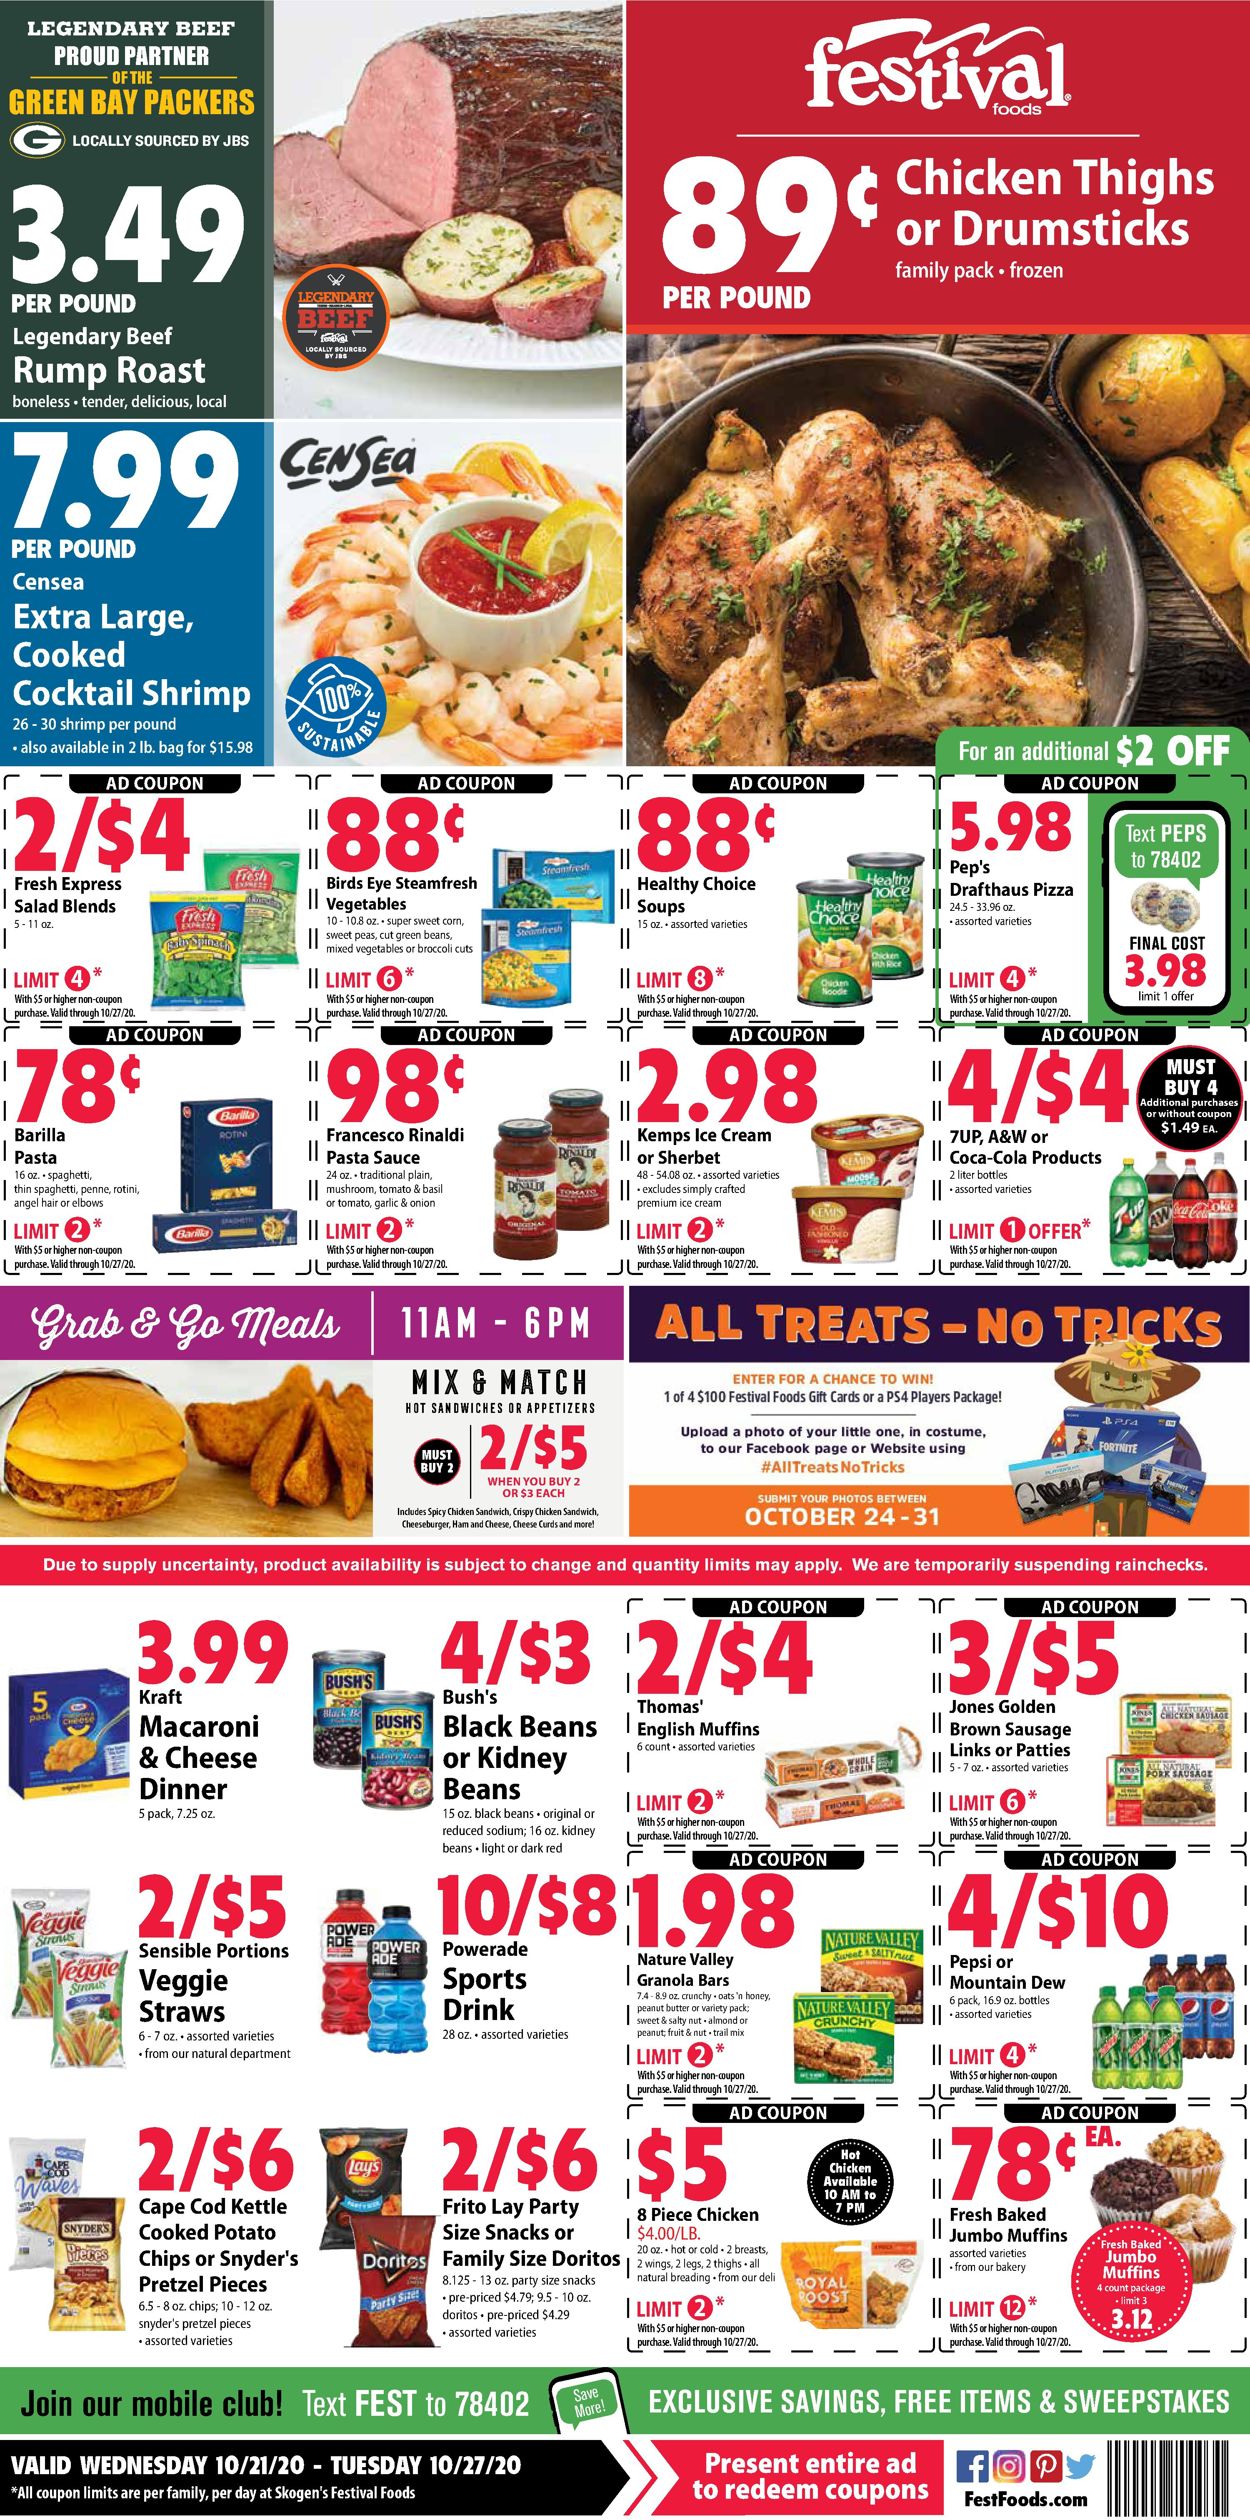 Festival Foods Current weekly ad 10/21 - 10/27/2020 [3] - frequent-ads.com